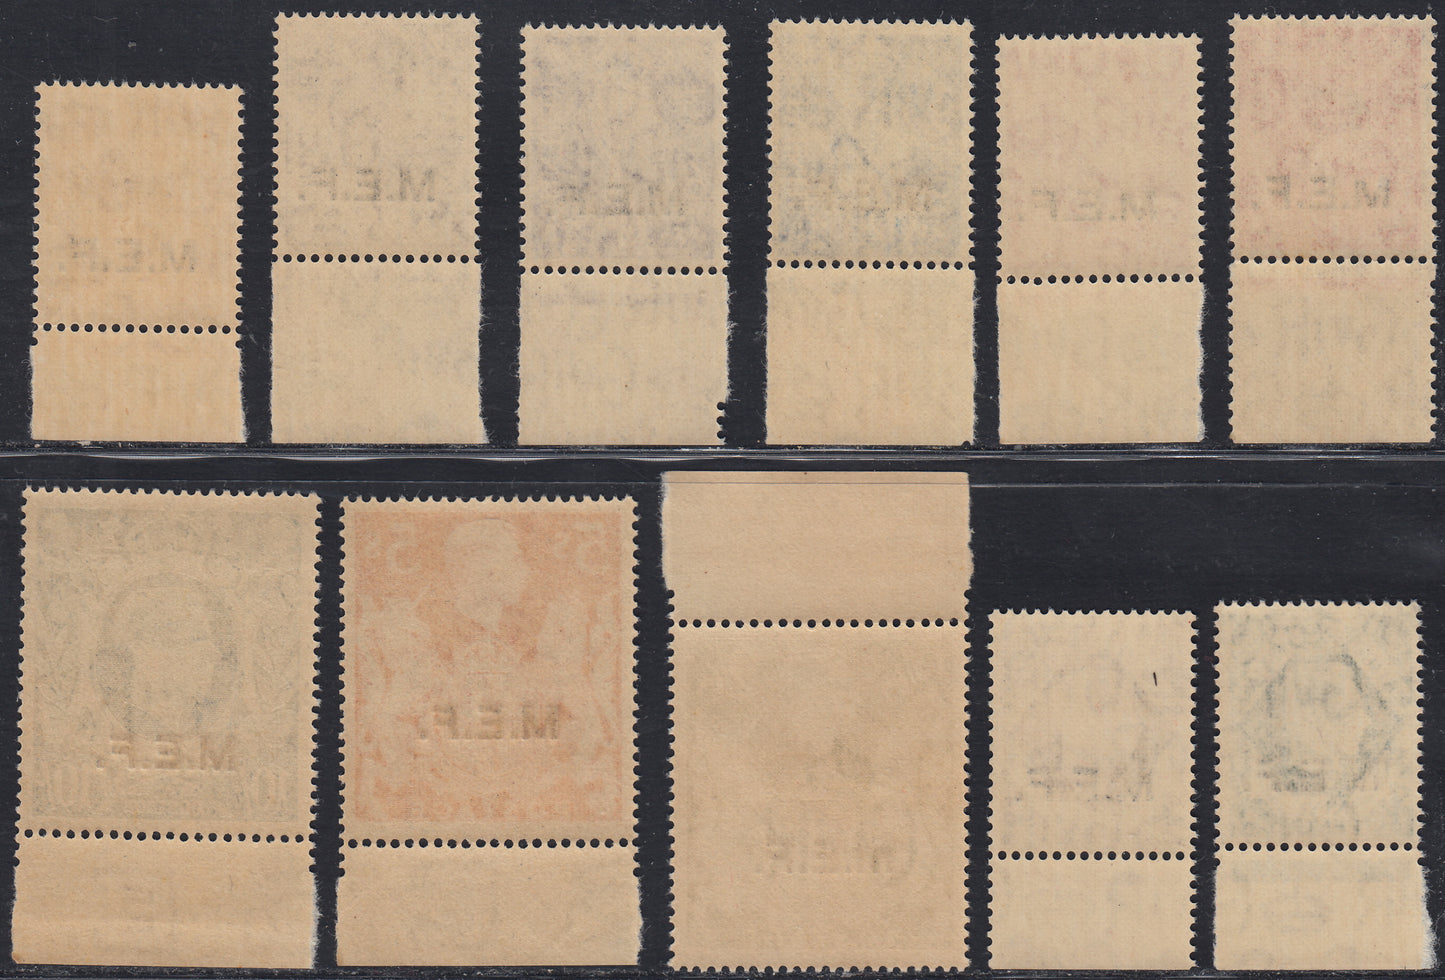 MEF3 1943/47 - Stamps of Great Britain, effigy of George VI overprinted MEF London edition, new with intact gum (6/16)